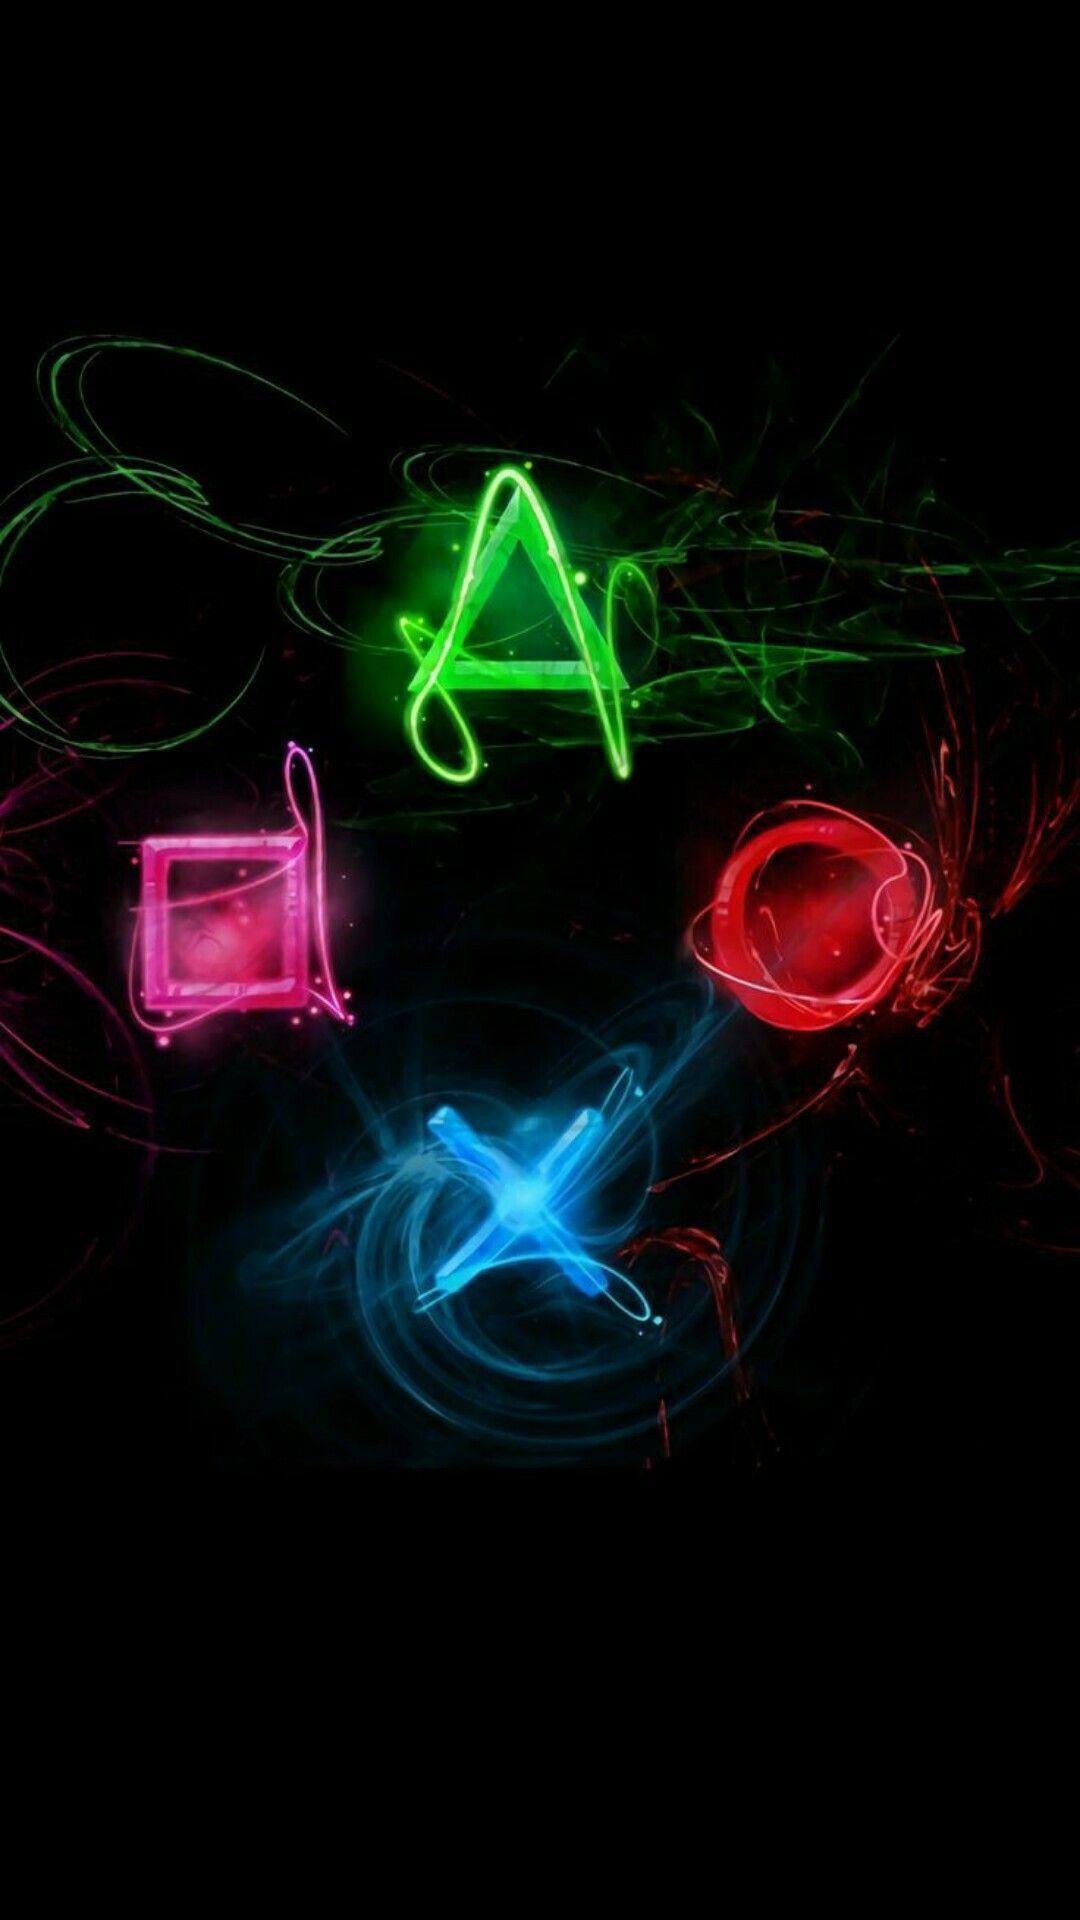 Gamer Backgrounds  Gaming wallpapers, Wallpaper, Abstract iphone